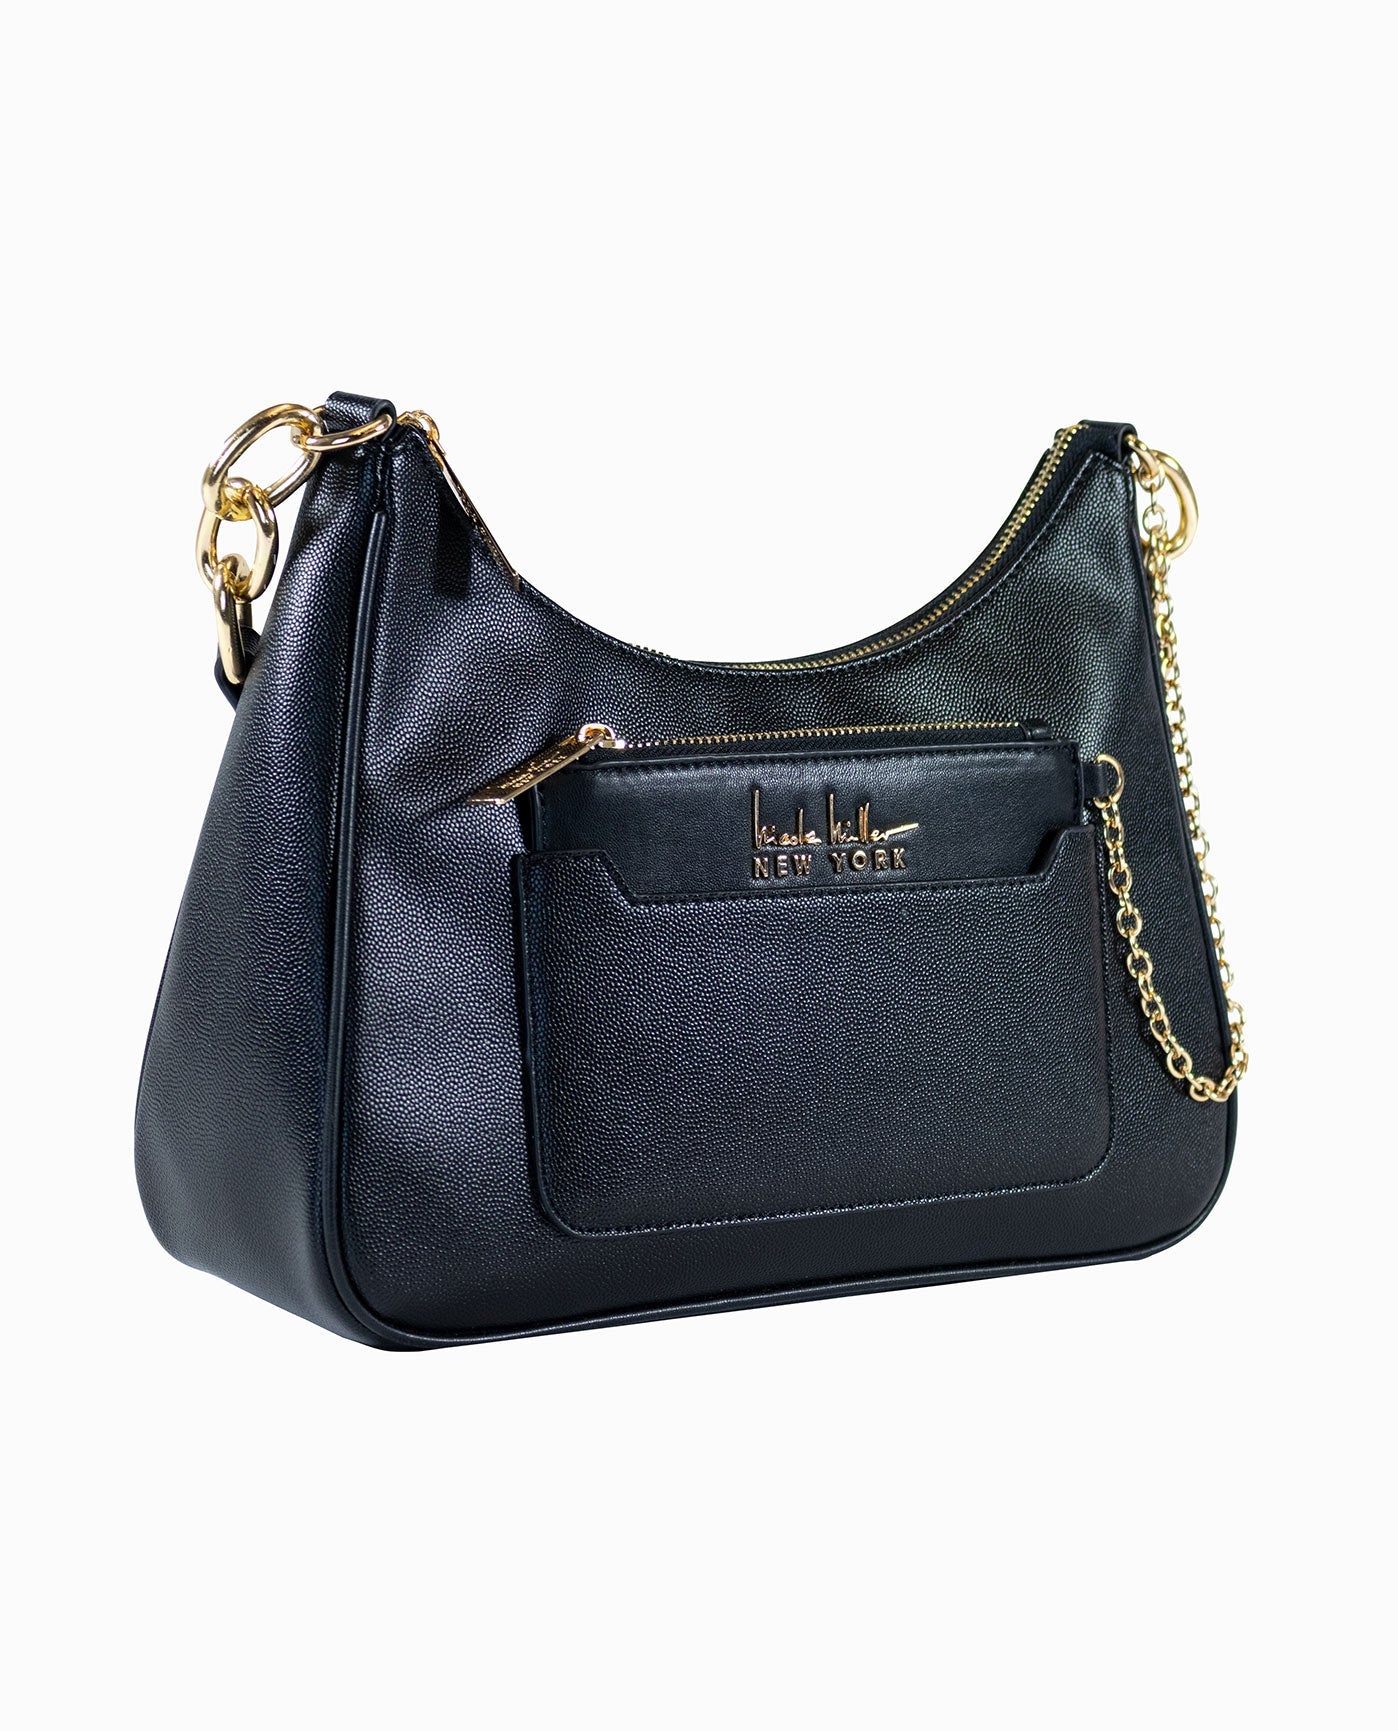 Crossbody Shoulder Bag with Matching Black Coin Purse and Gold Details | Black